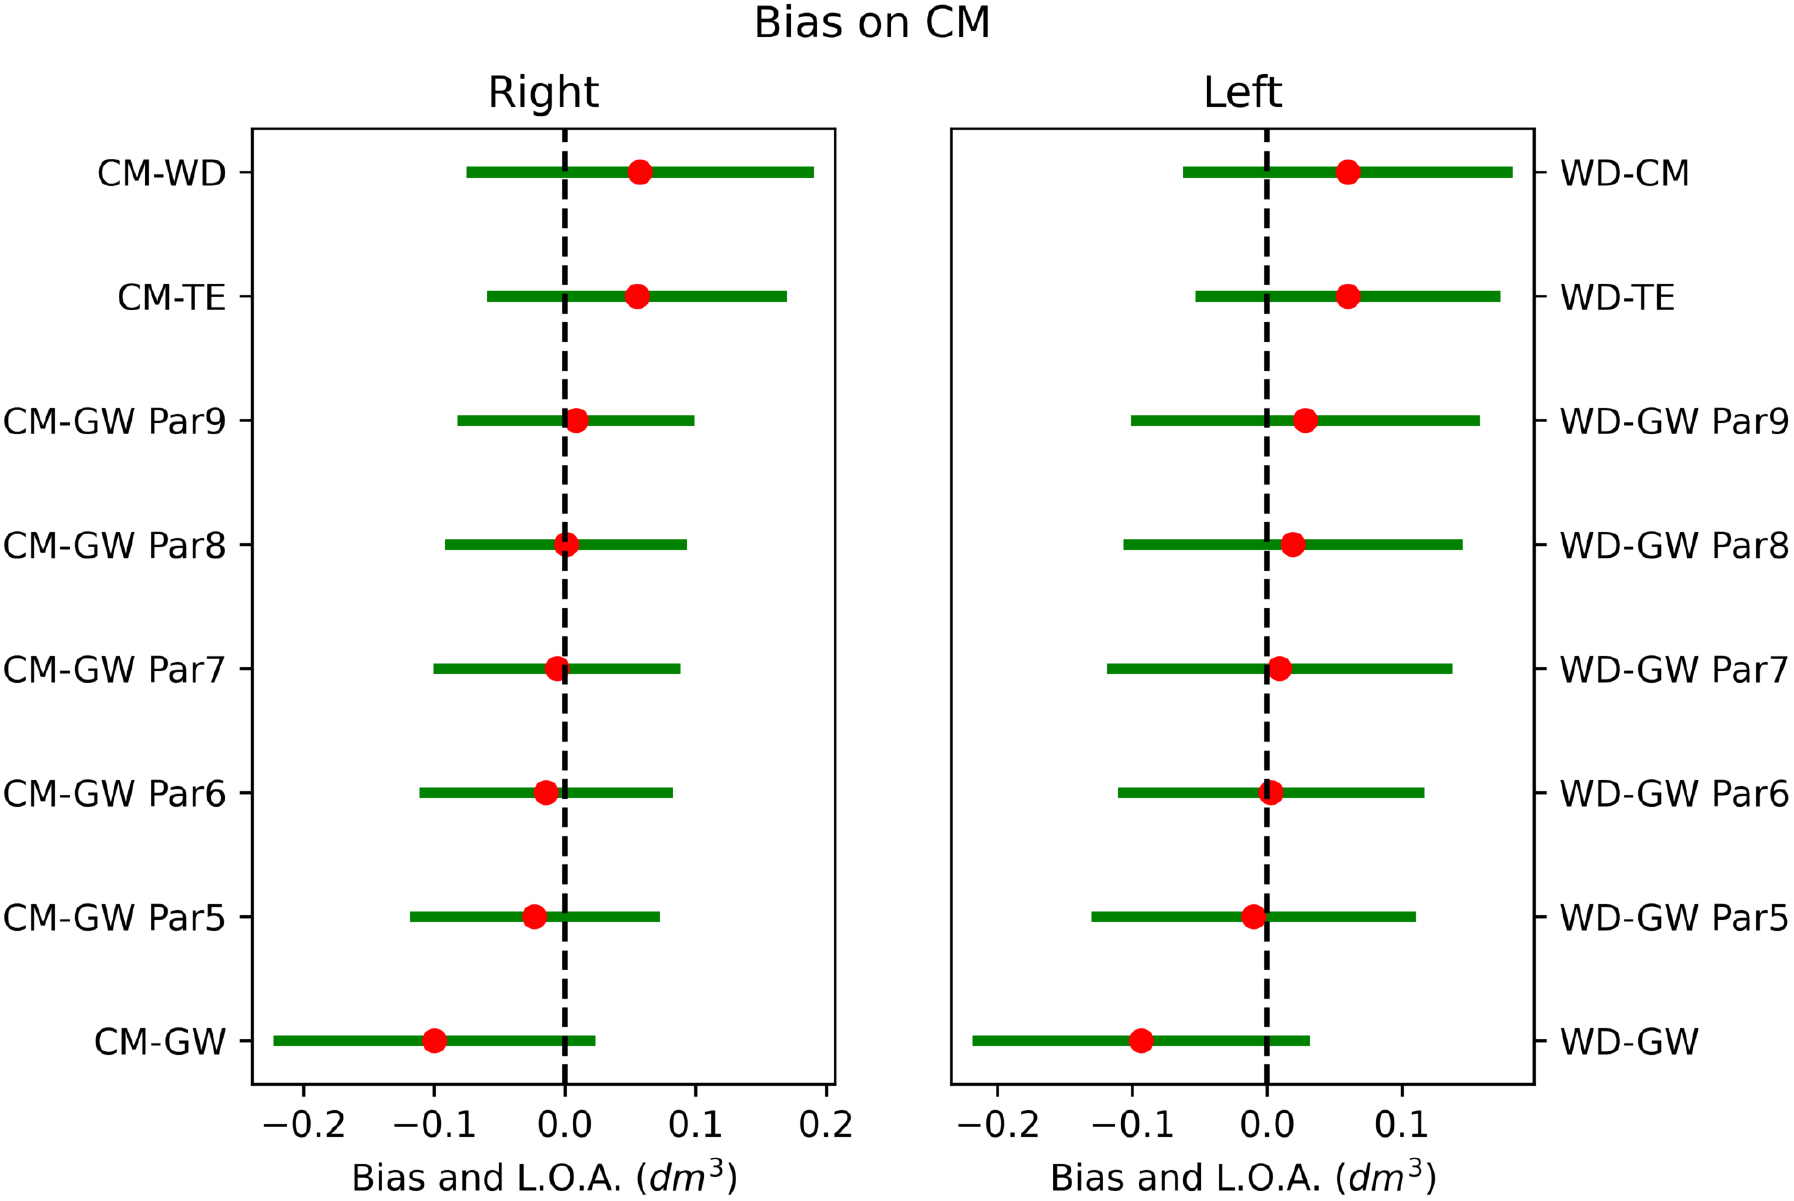 Bias between CM and other volumetrics on right and left hands. Red dot is the systematic difference, while the line extents represent the limits of agreement (L.O.A.).